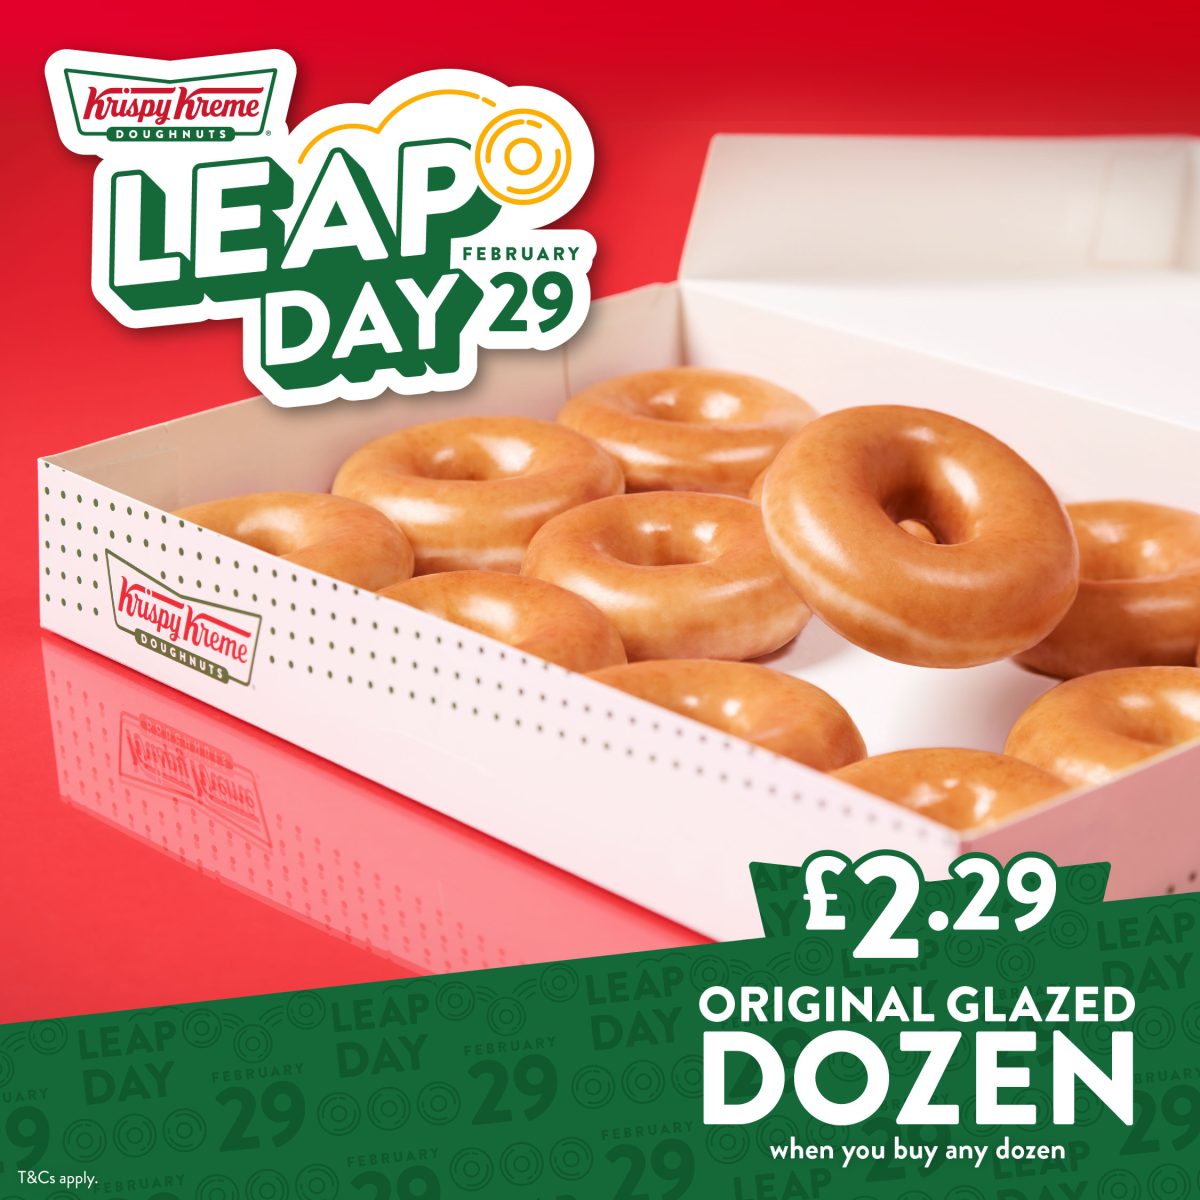 LeapDay 2.29 offer UK square